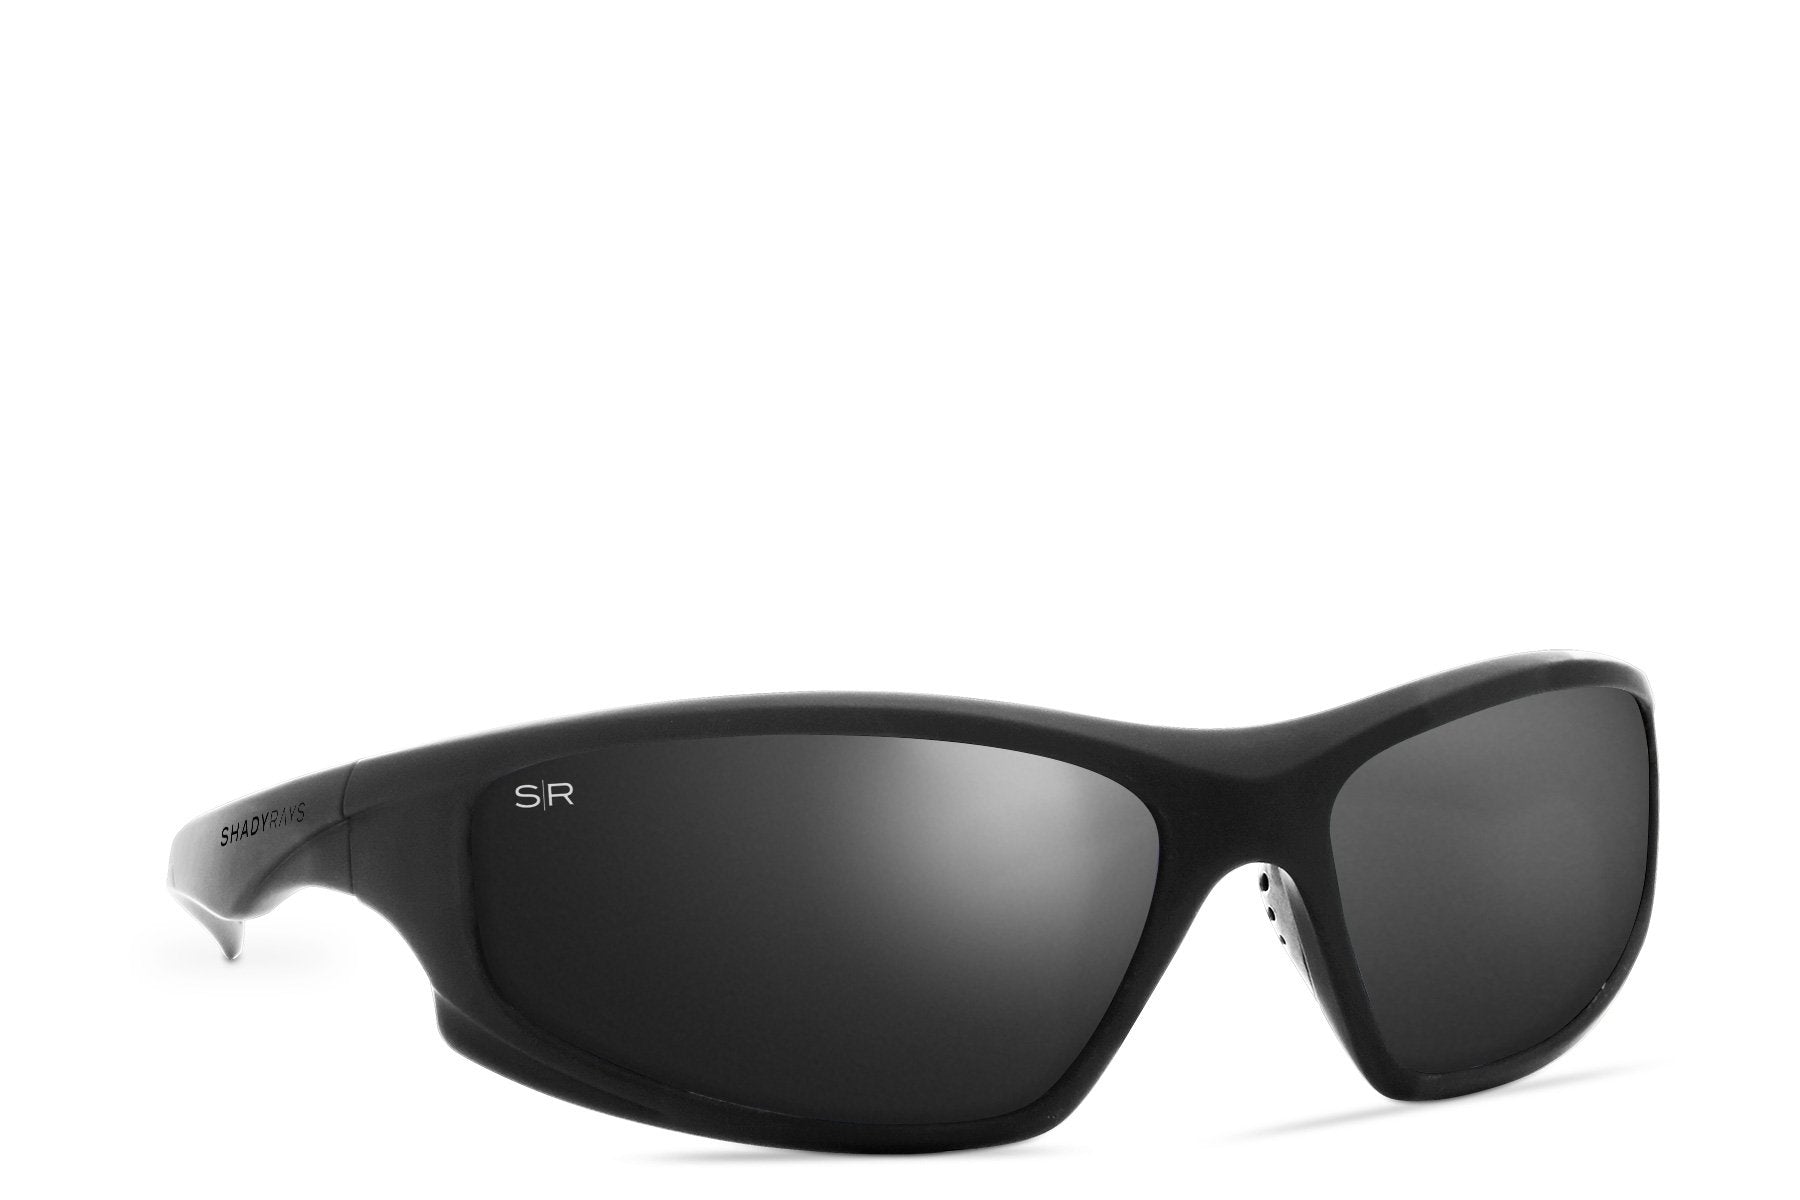 X Series - Blackout SR Pro Polarized INCOGNITO Sunglasses | Black Sport Sunglasses | Cycling Glasses | Best Christmas Gifts | Gifts for the Holidays 